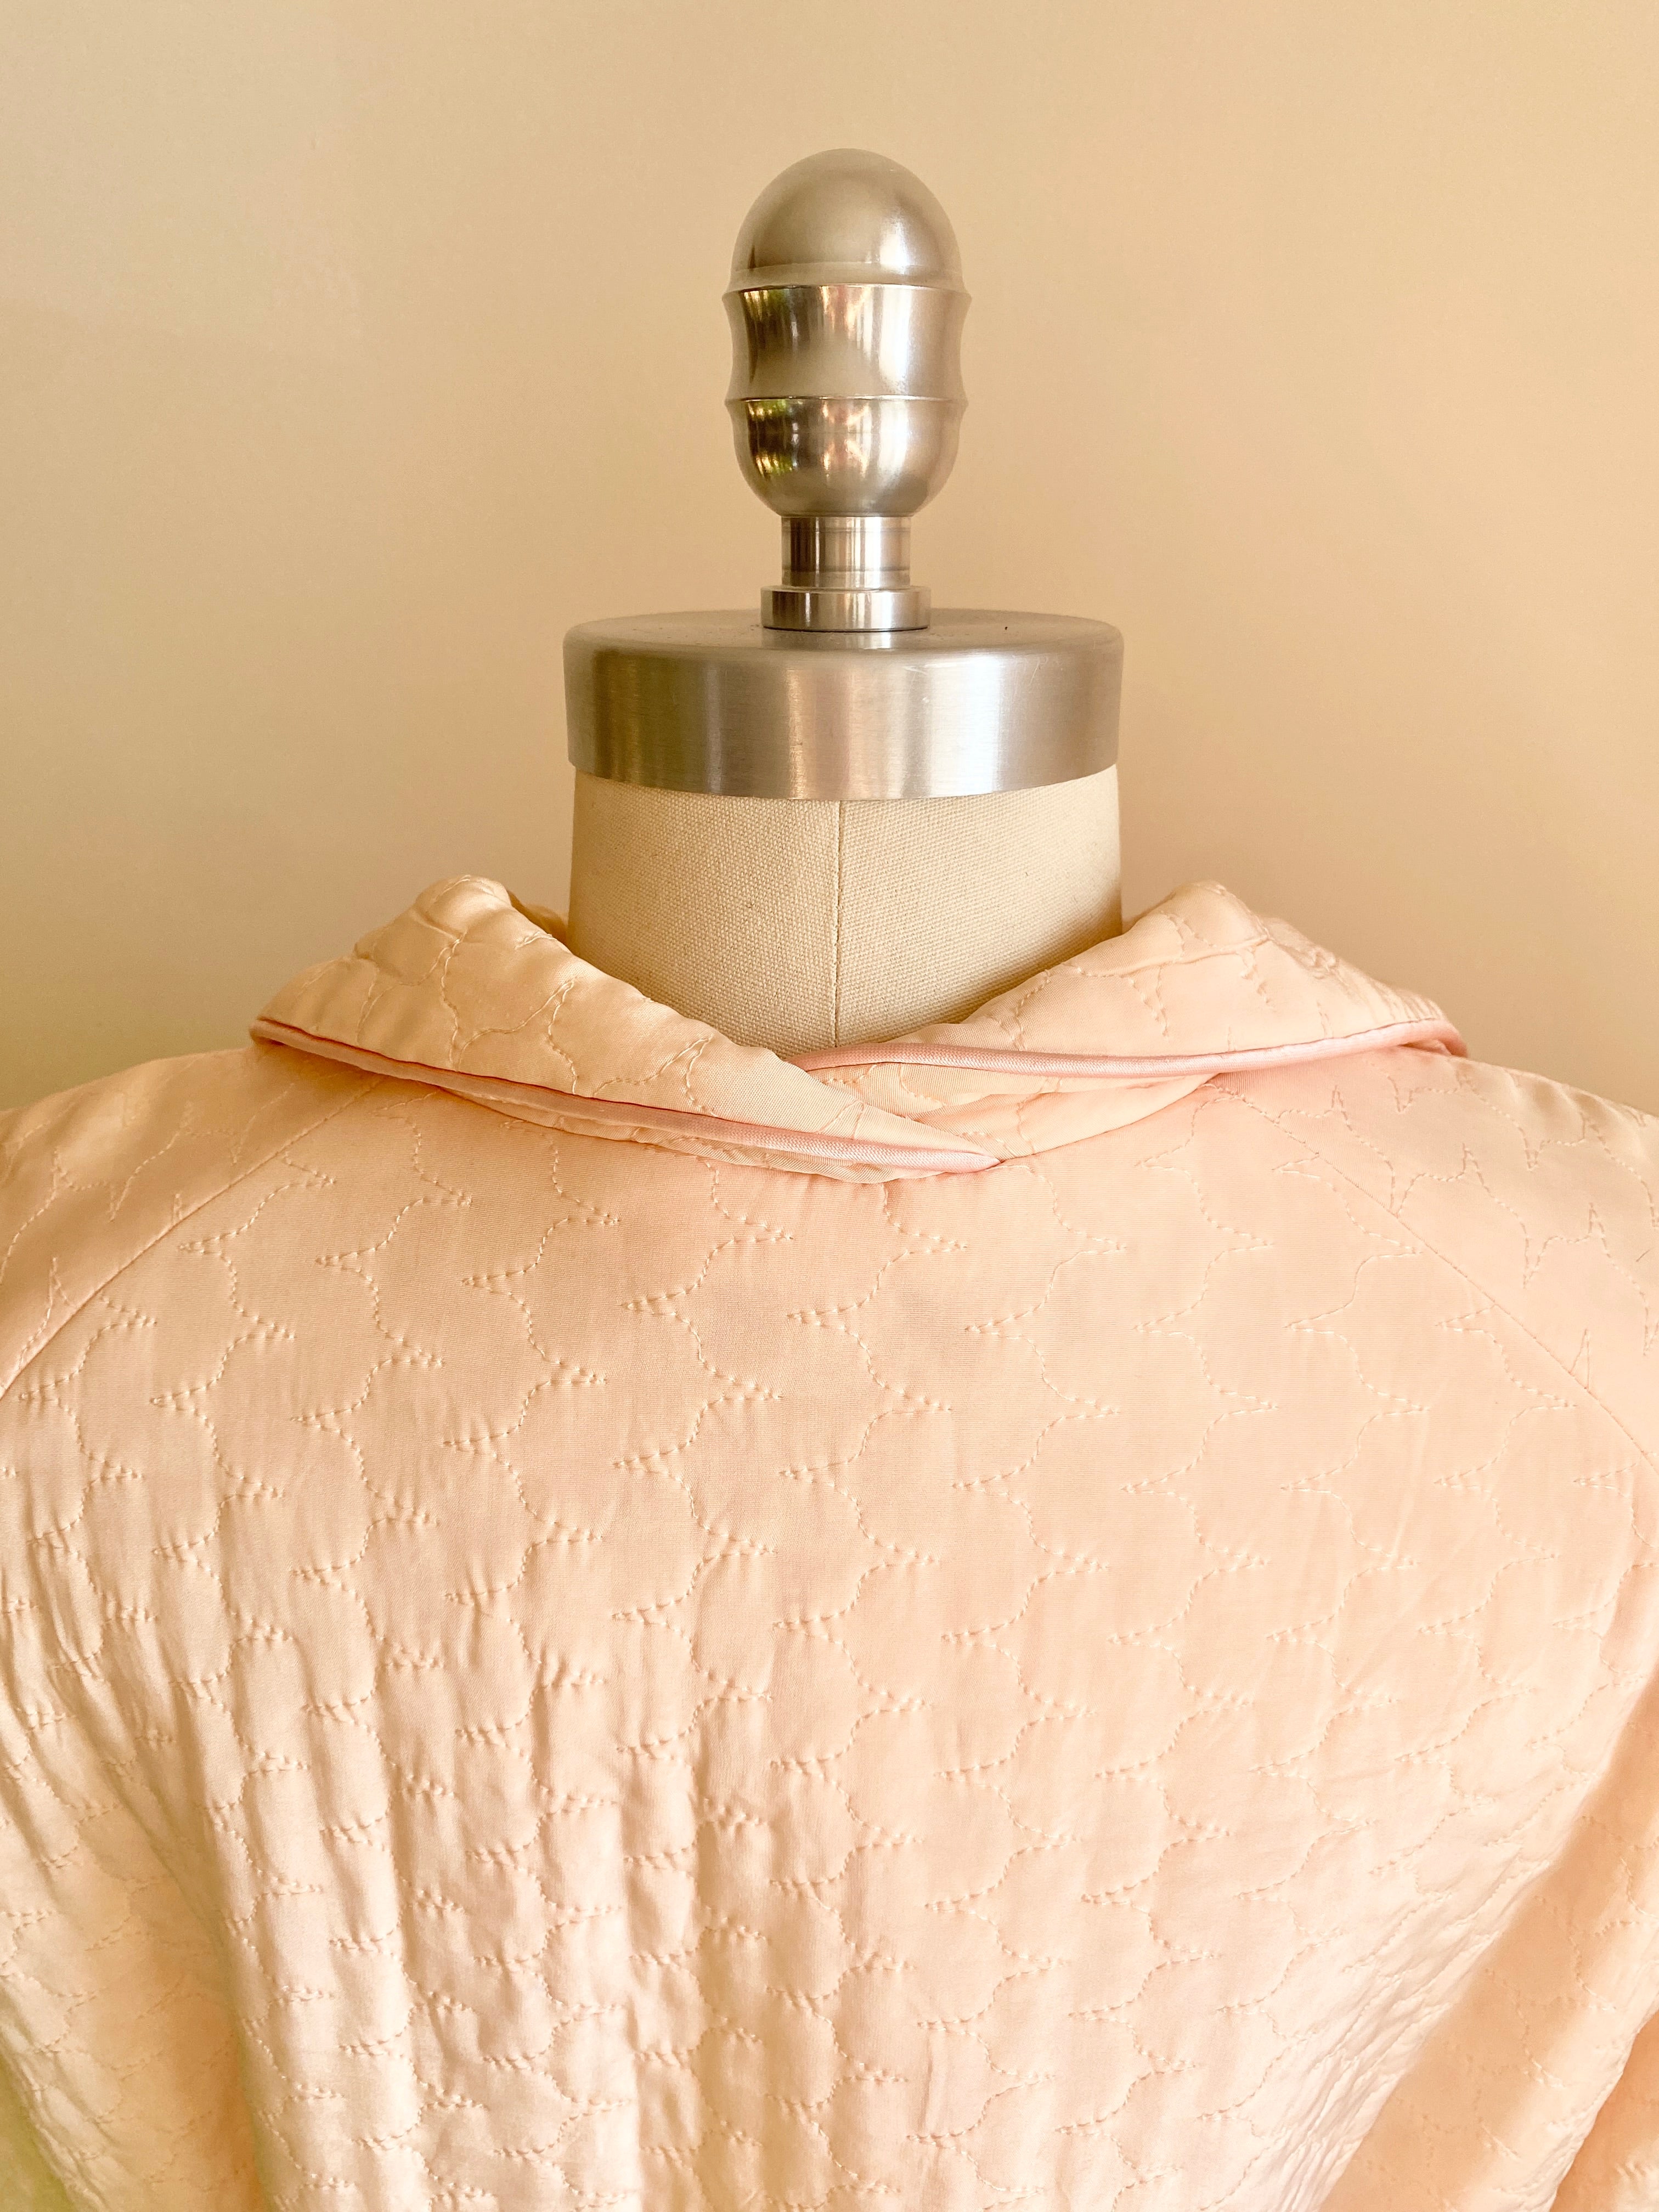 Vintage 1940s Beauty Form Satin Light Pink Peach Padded Quilted Bed Jacket with Kimono Bell Sleeves M or L